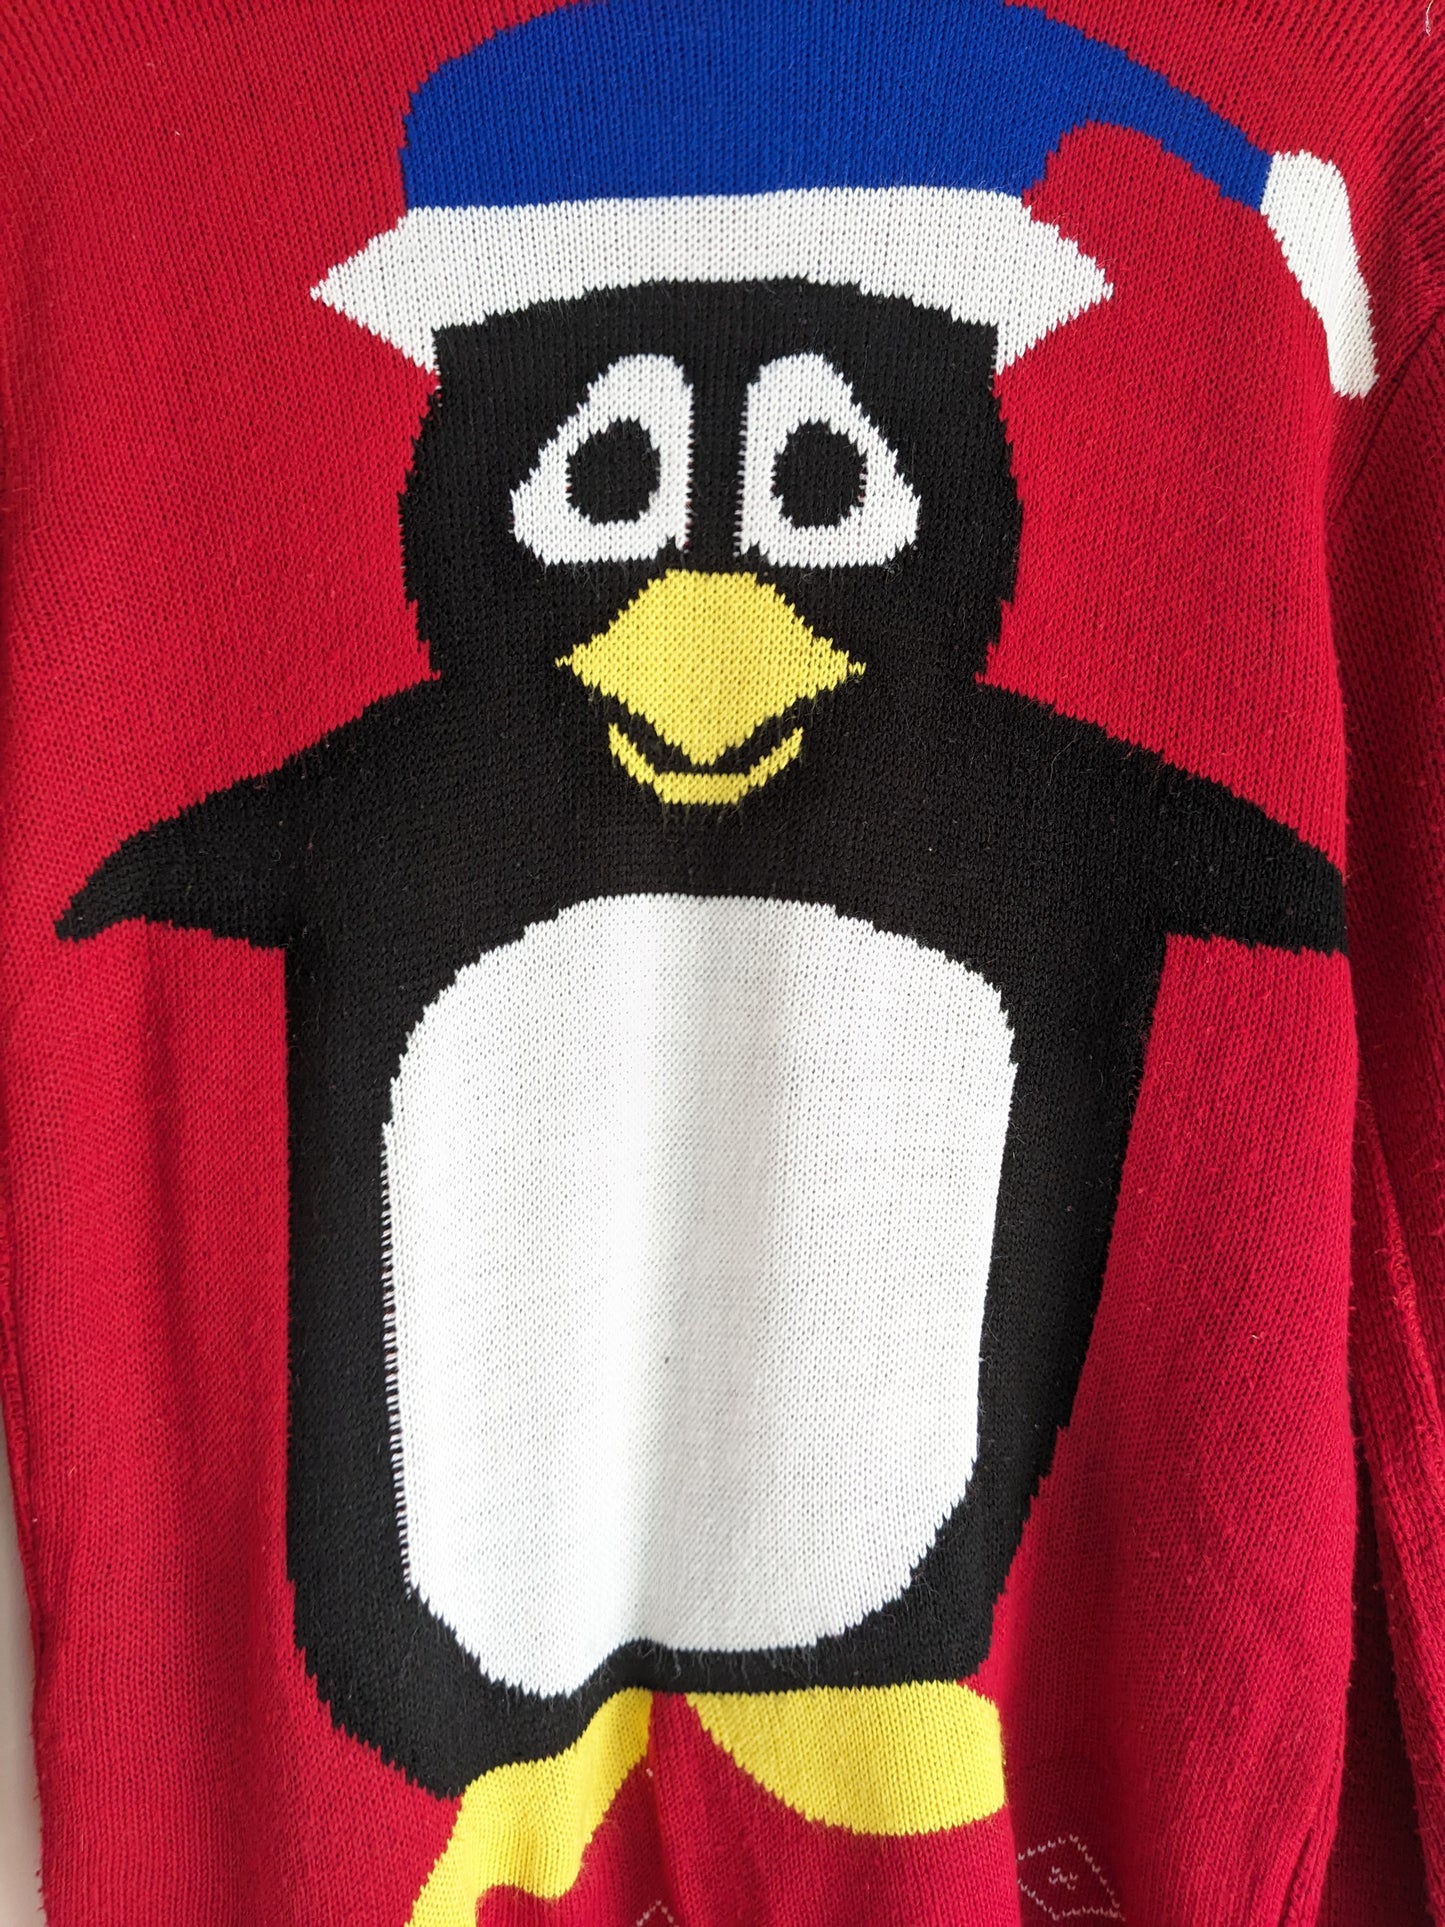 FAB Penguin Print Red Christmas Sweater